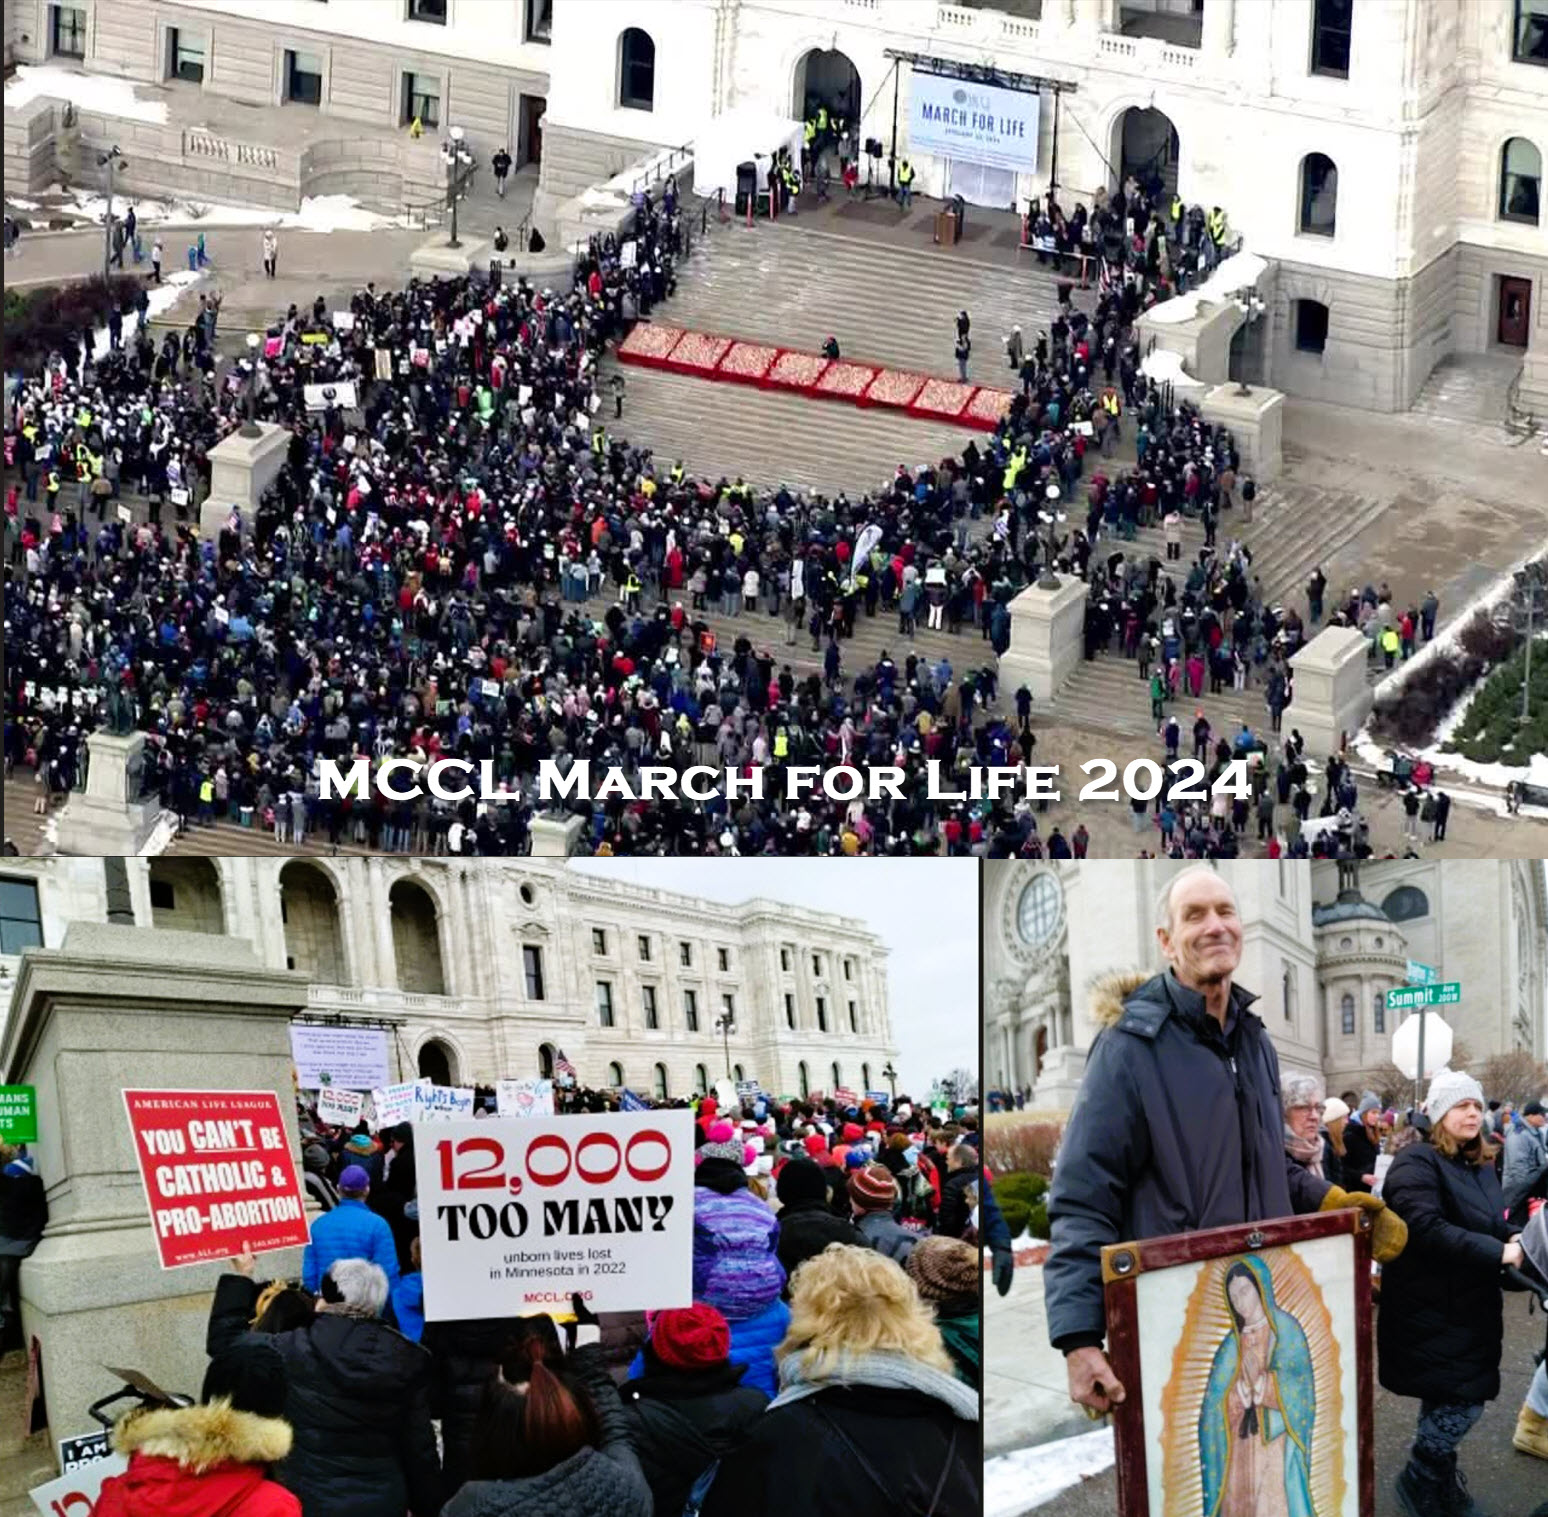 MCCL March for Life 2024